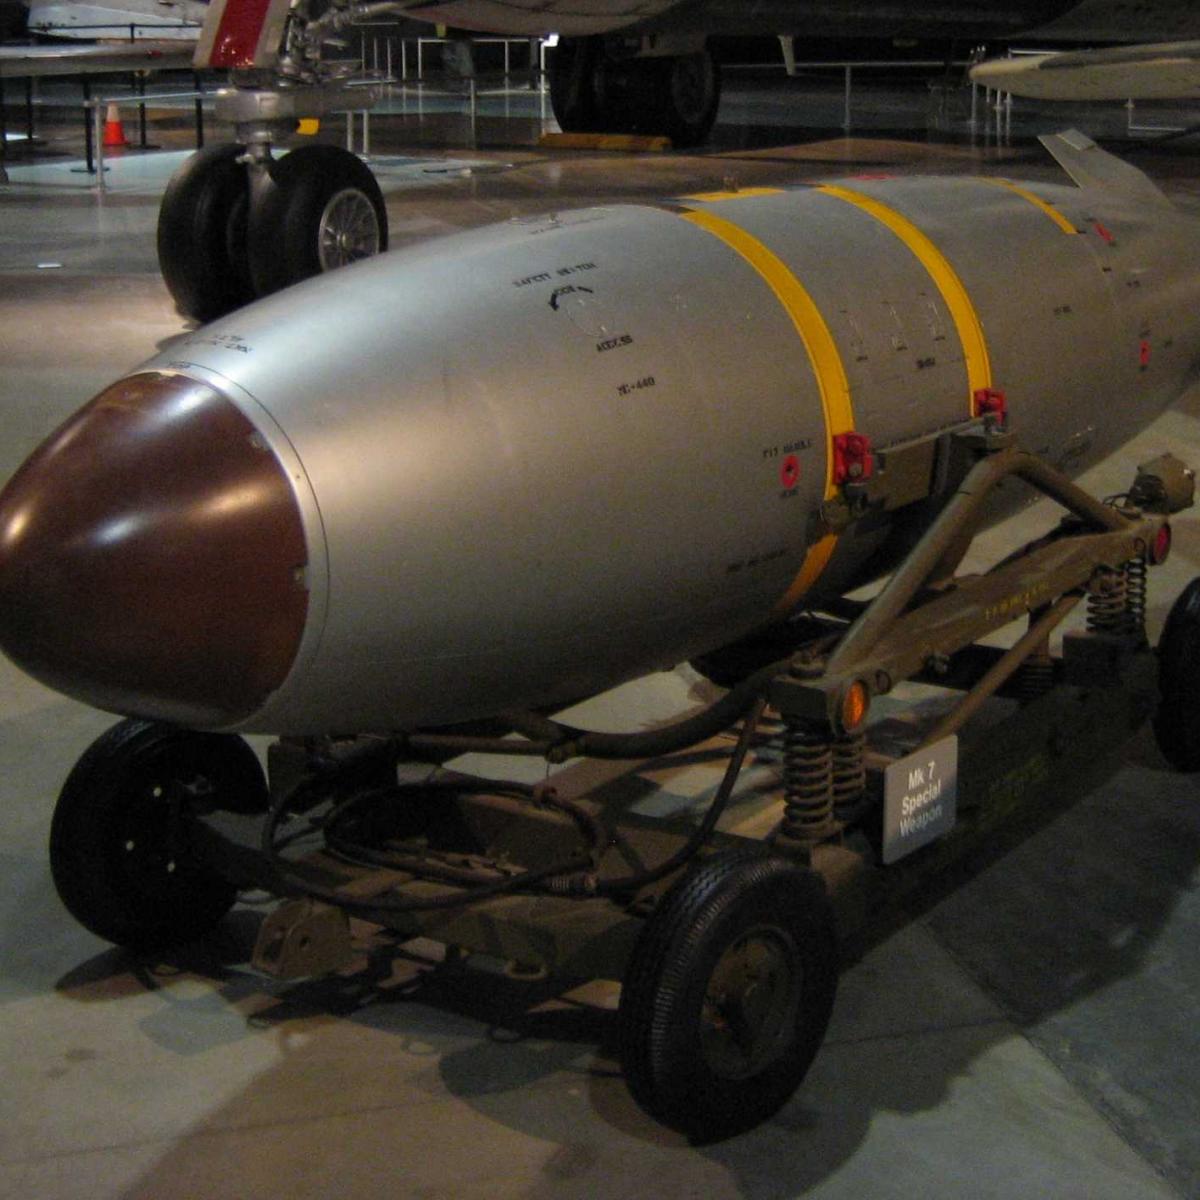 If America Splits Up, What Happens to the Nukes?